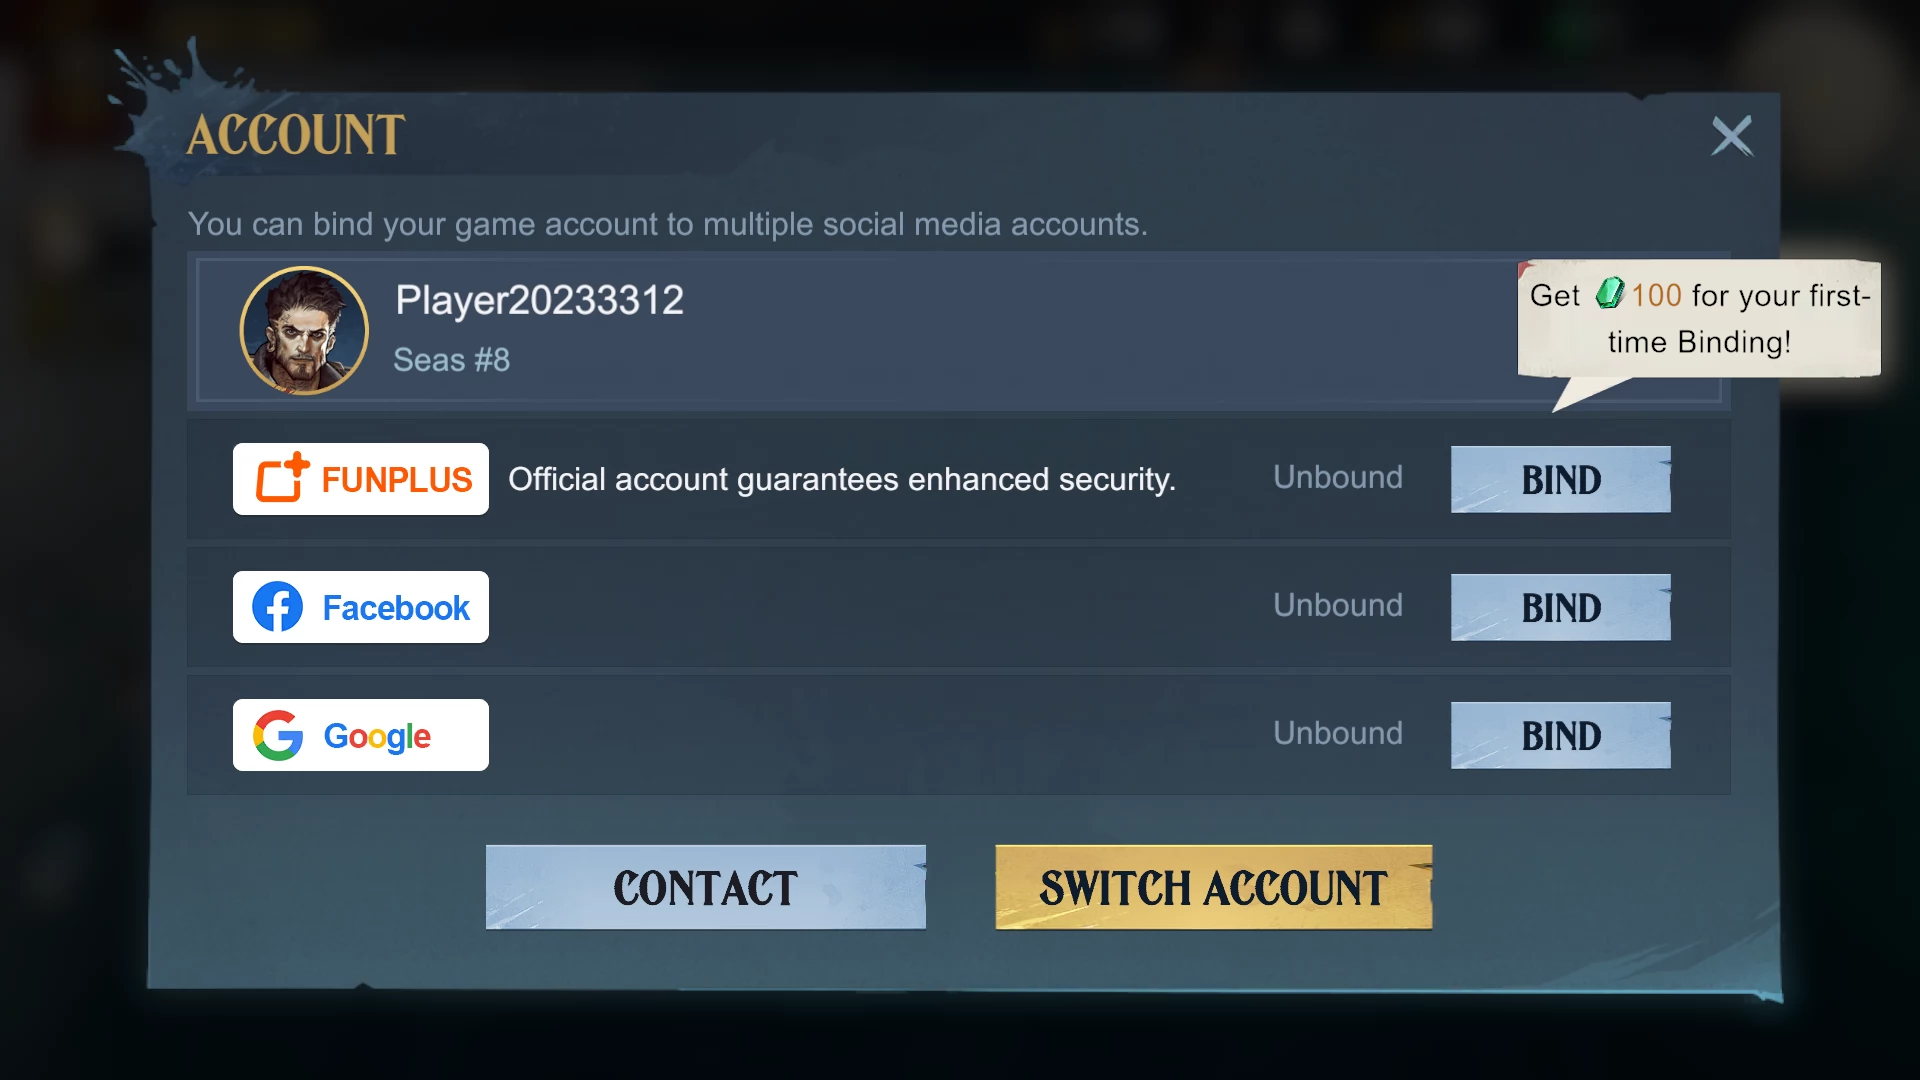 HOW TO CONTACT MOONTON REGARDING SWITCHING ACCOUNT ISSUES